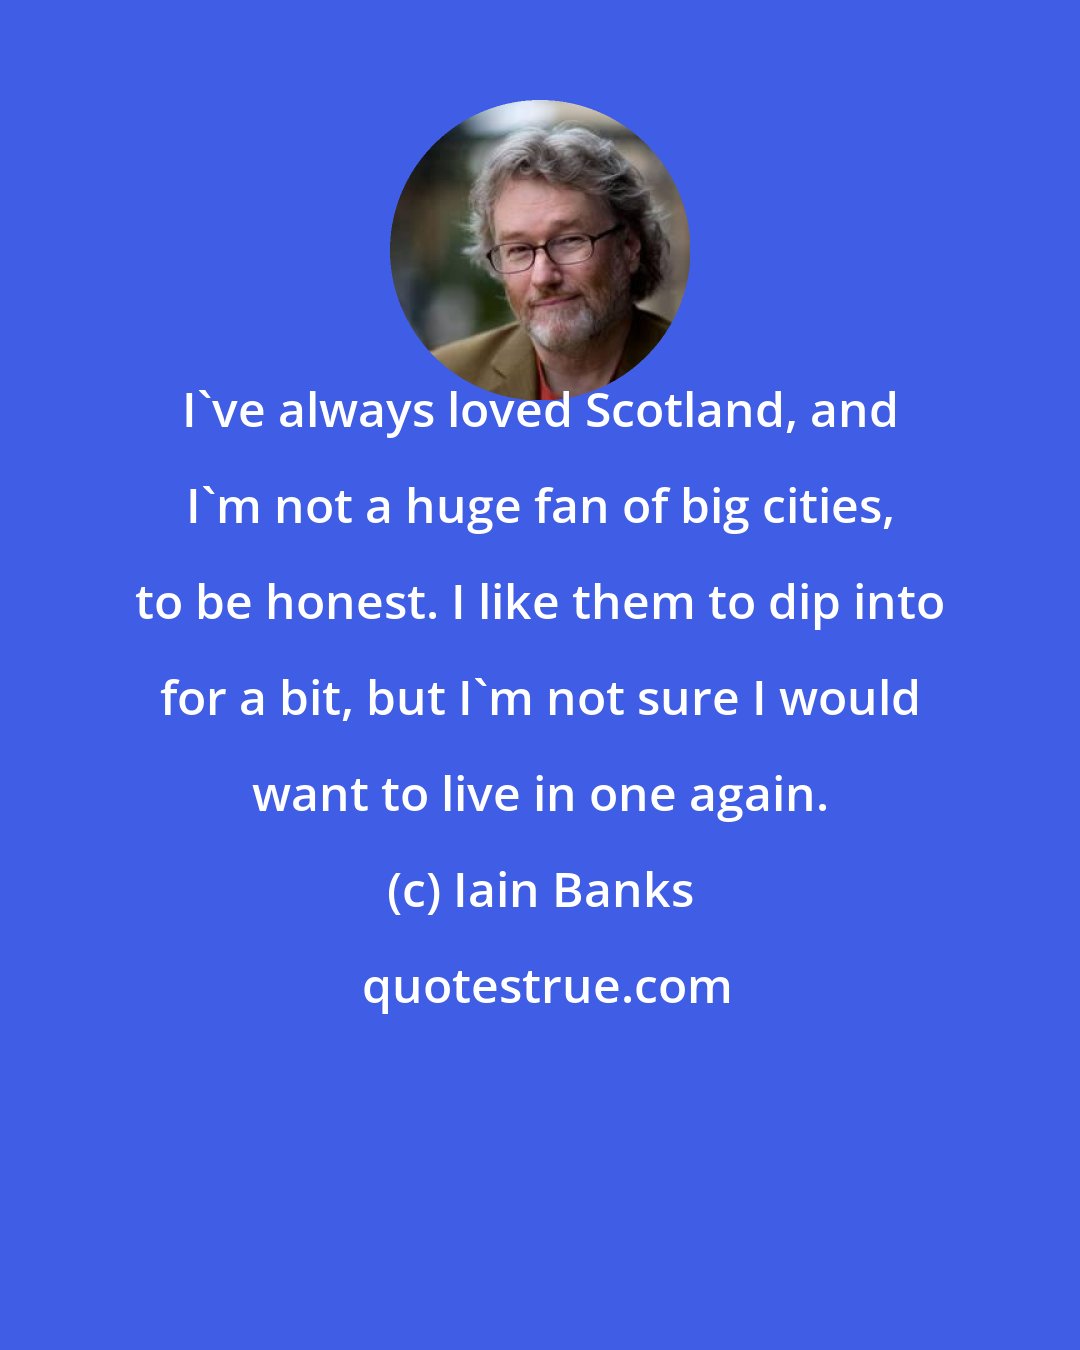 Iain Banks: I've always loved Scotland, and I'm not a huge fan of big cities, to be honest. I like them to dip into for a bit, but I'm not sure I would want to live in one again.